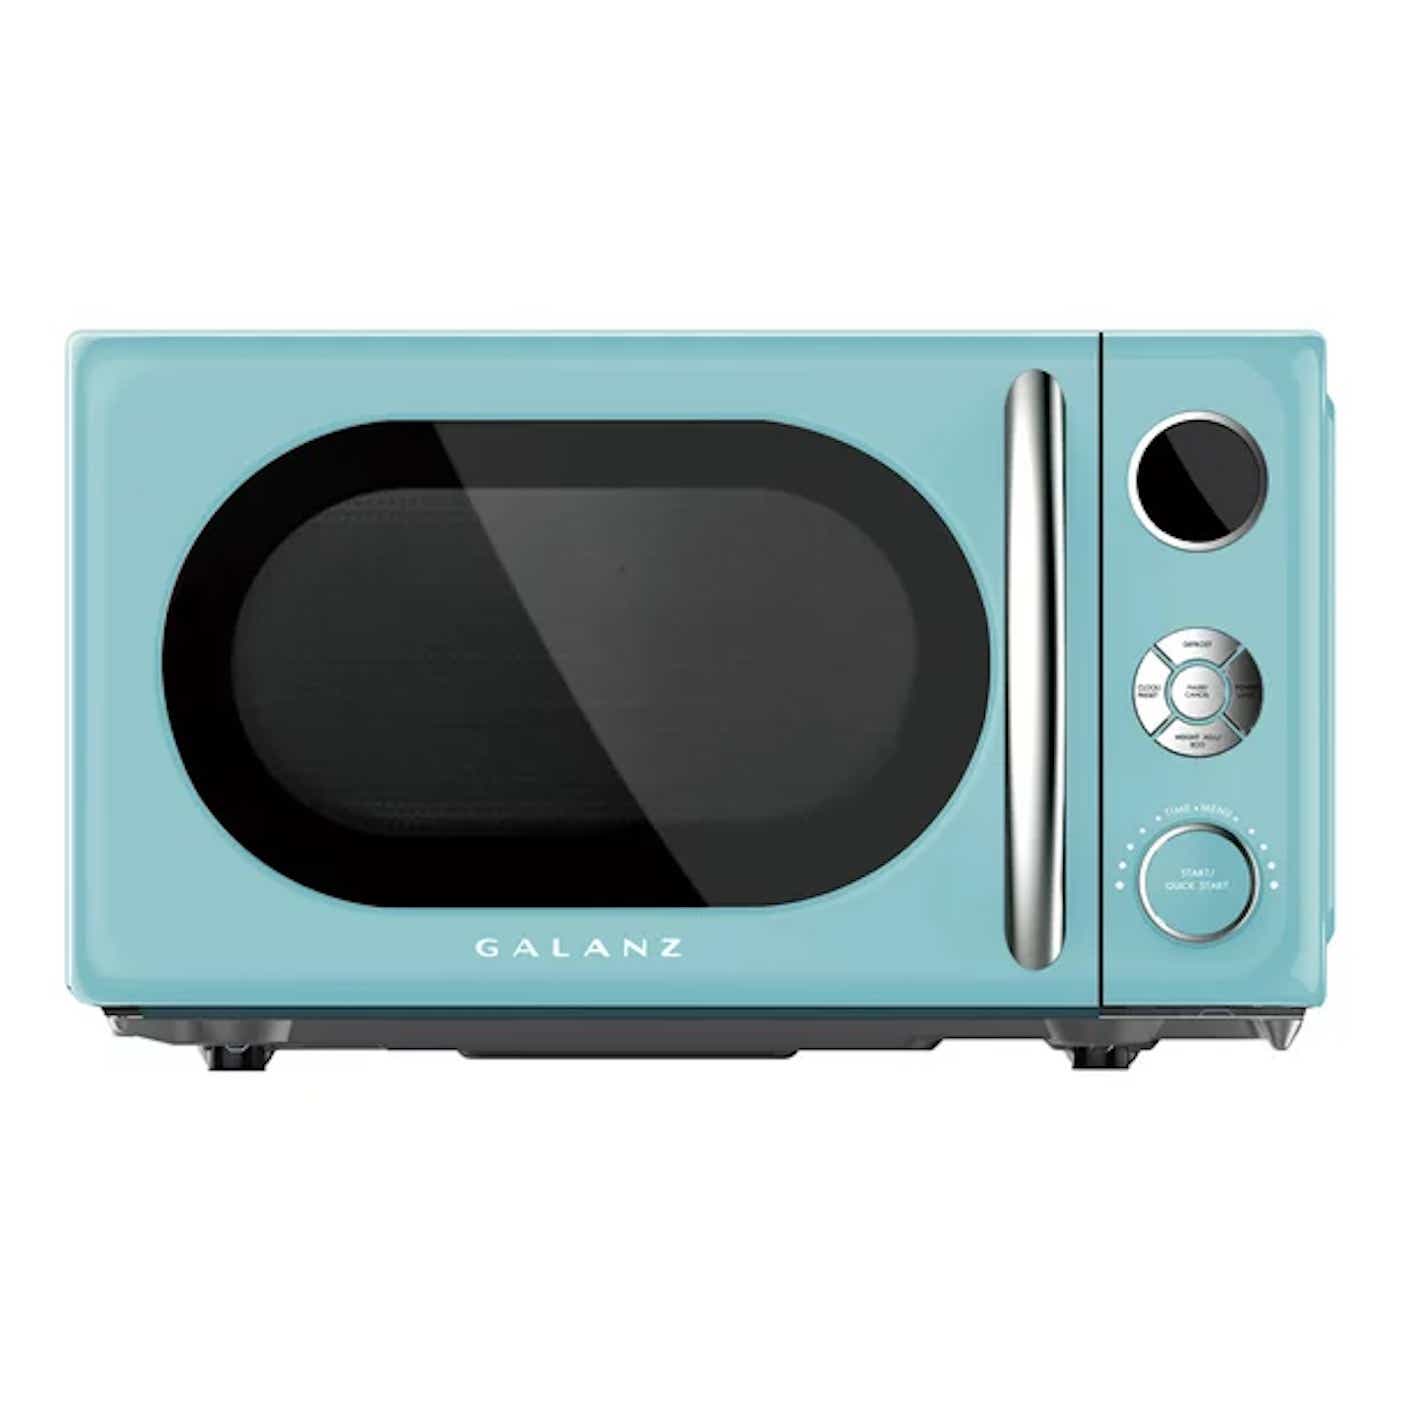 A baby blue retro style microwave with silver hardware sits in front of a plain white background.